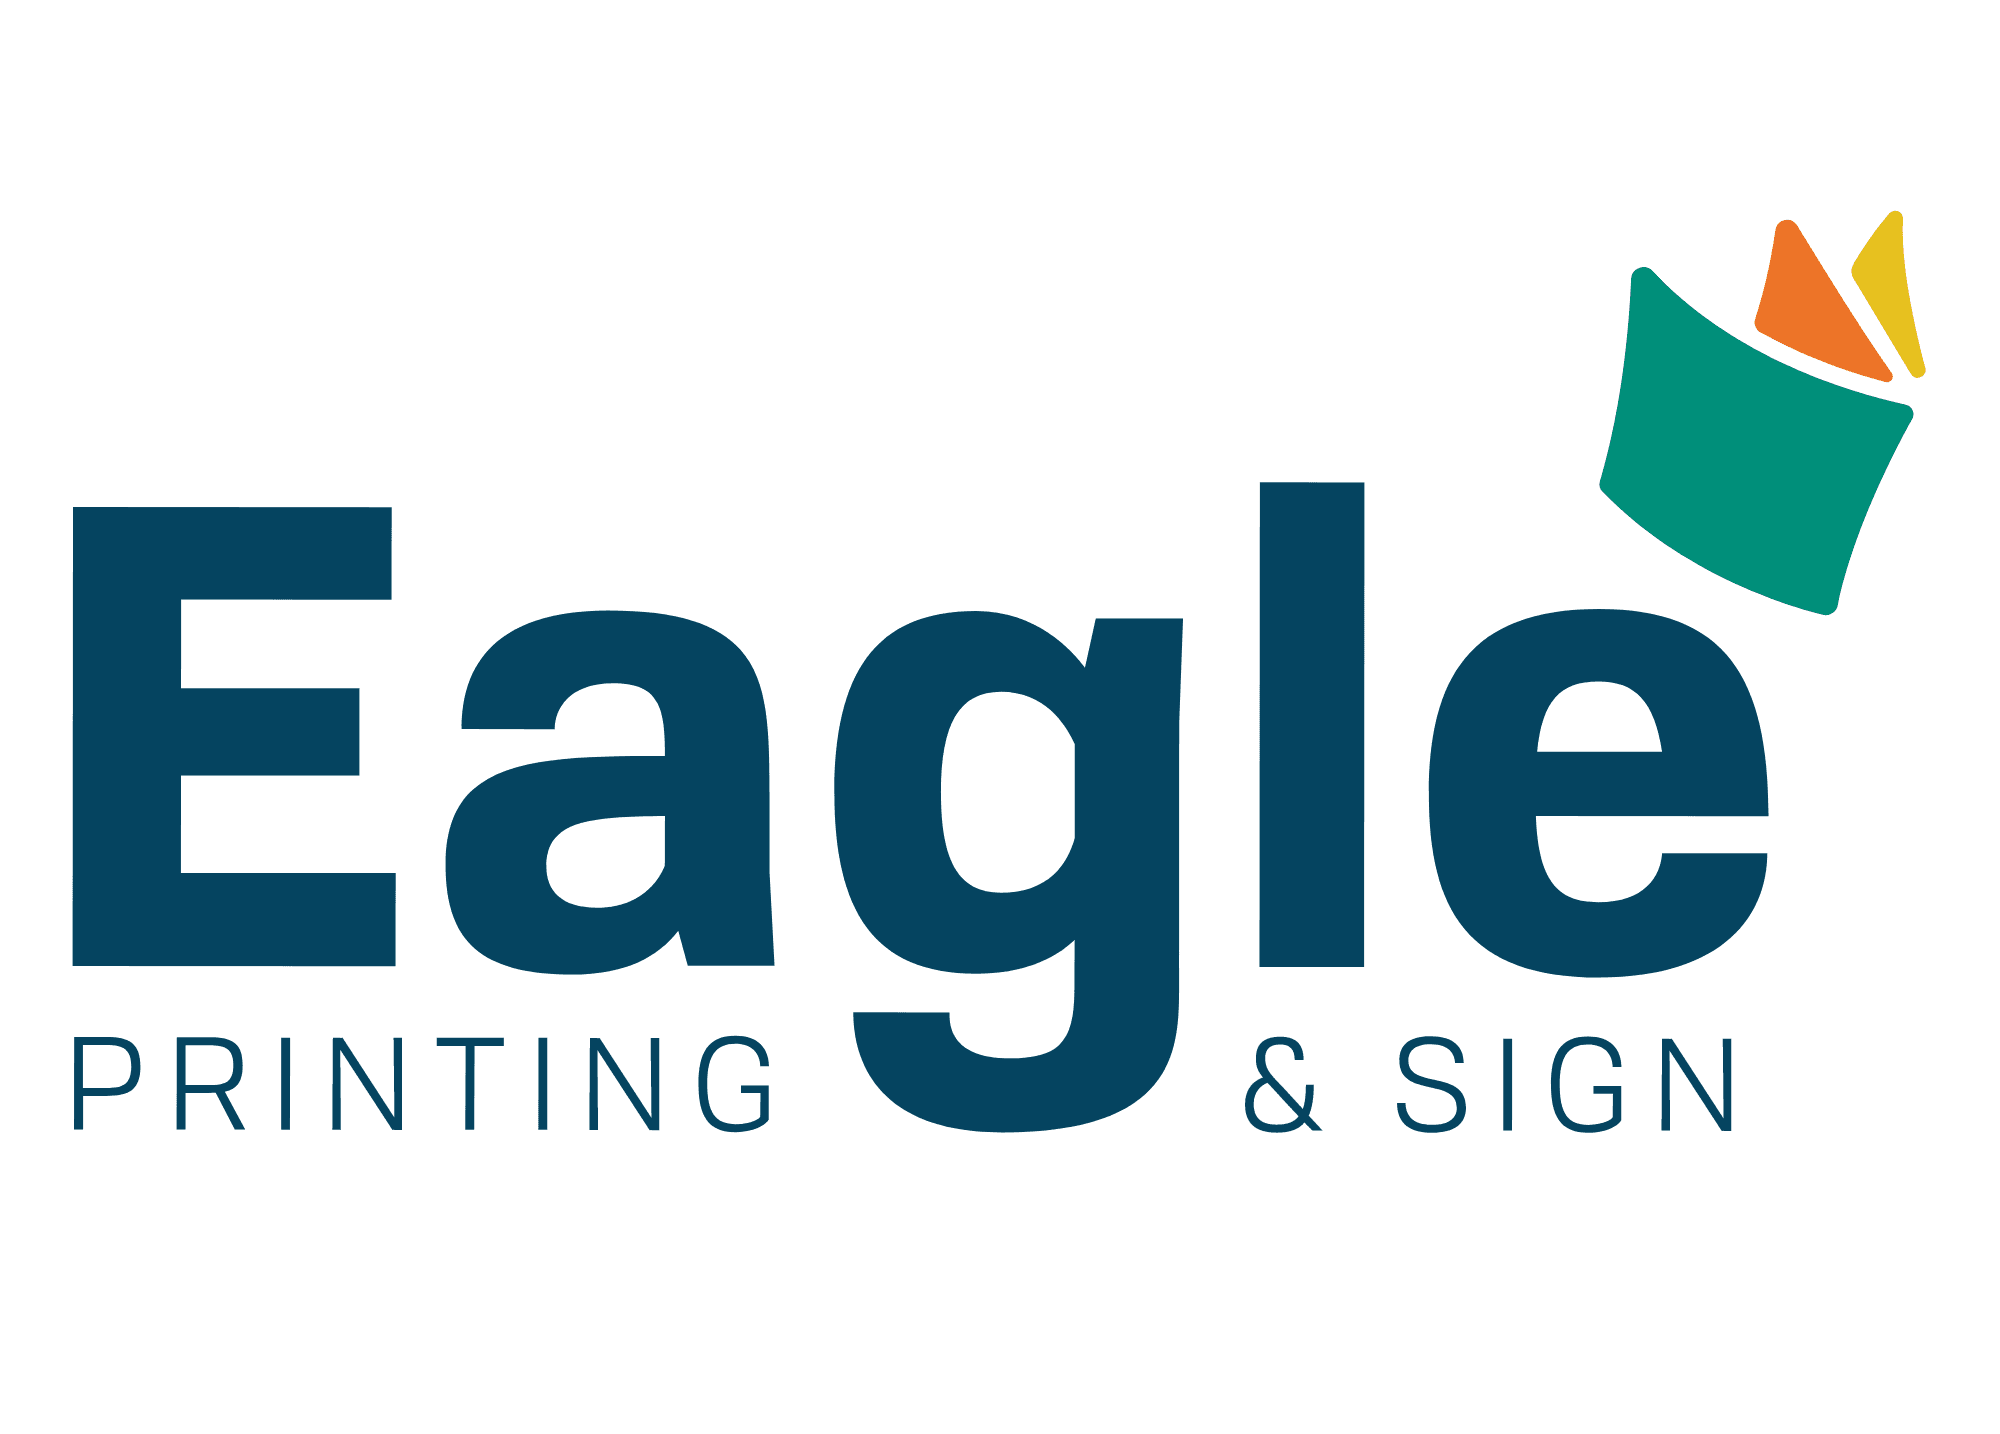 Eagle Printing and Sign